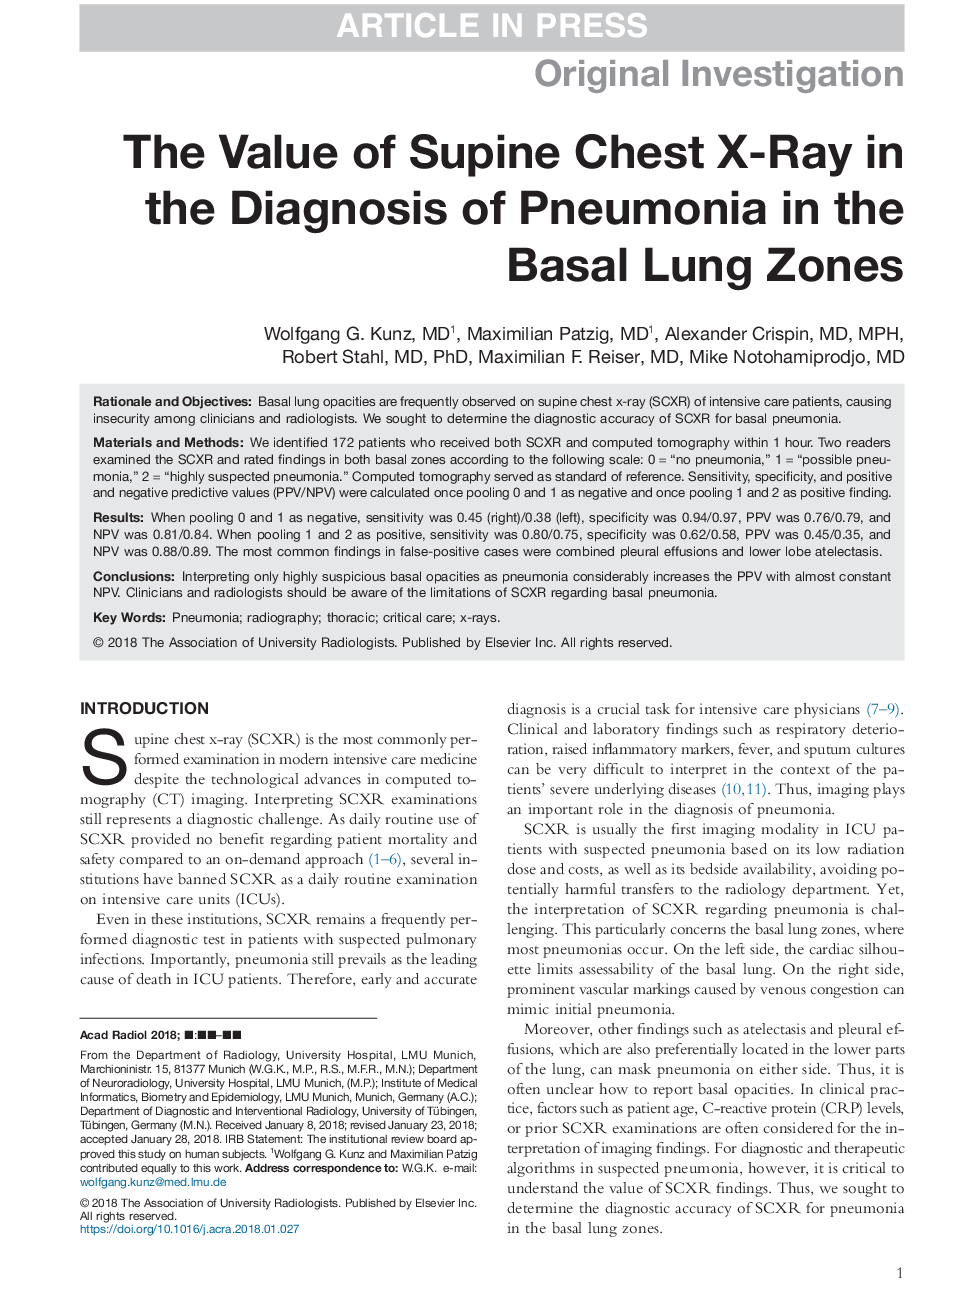 The Value of Supine Chest X-Ray in the Diagnosis of Pneumonia in the Basal Lung Zones